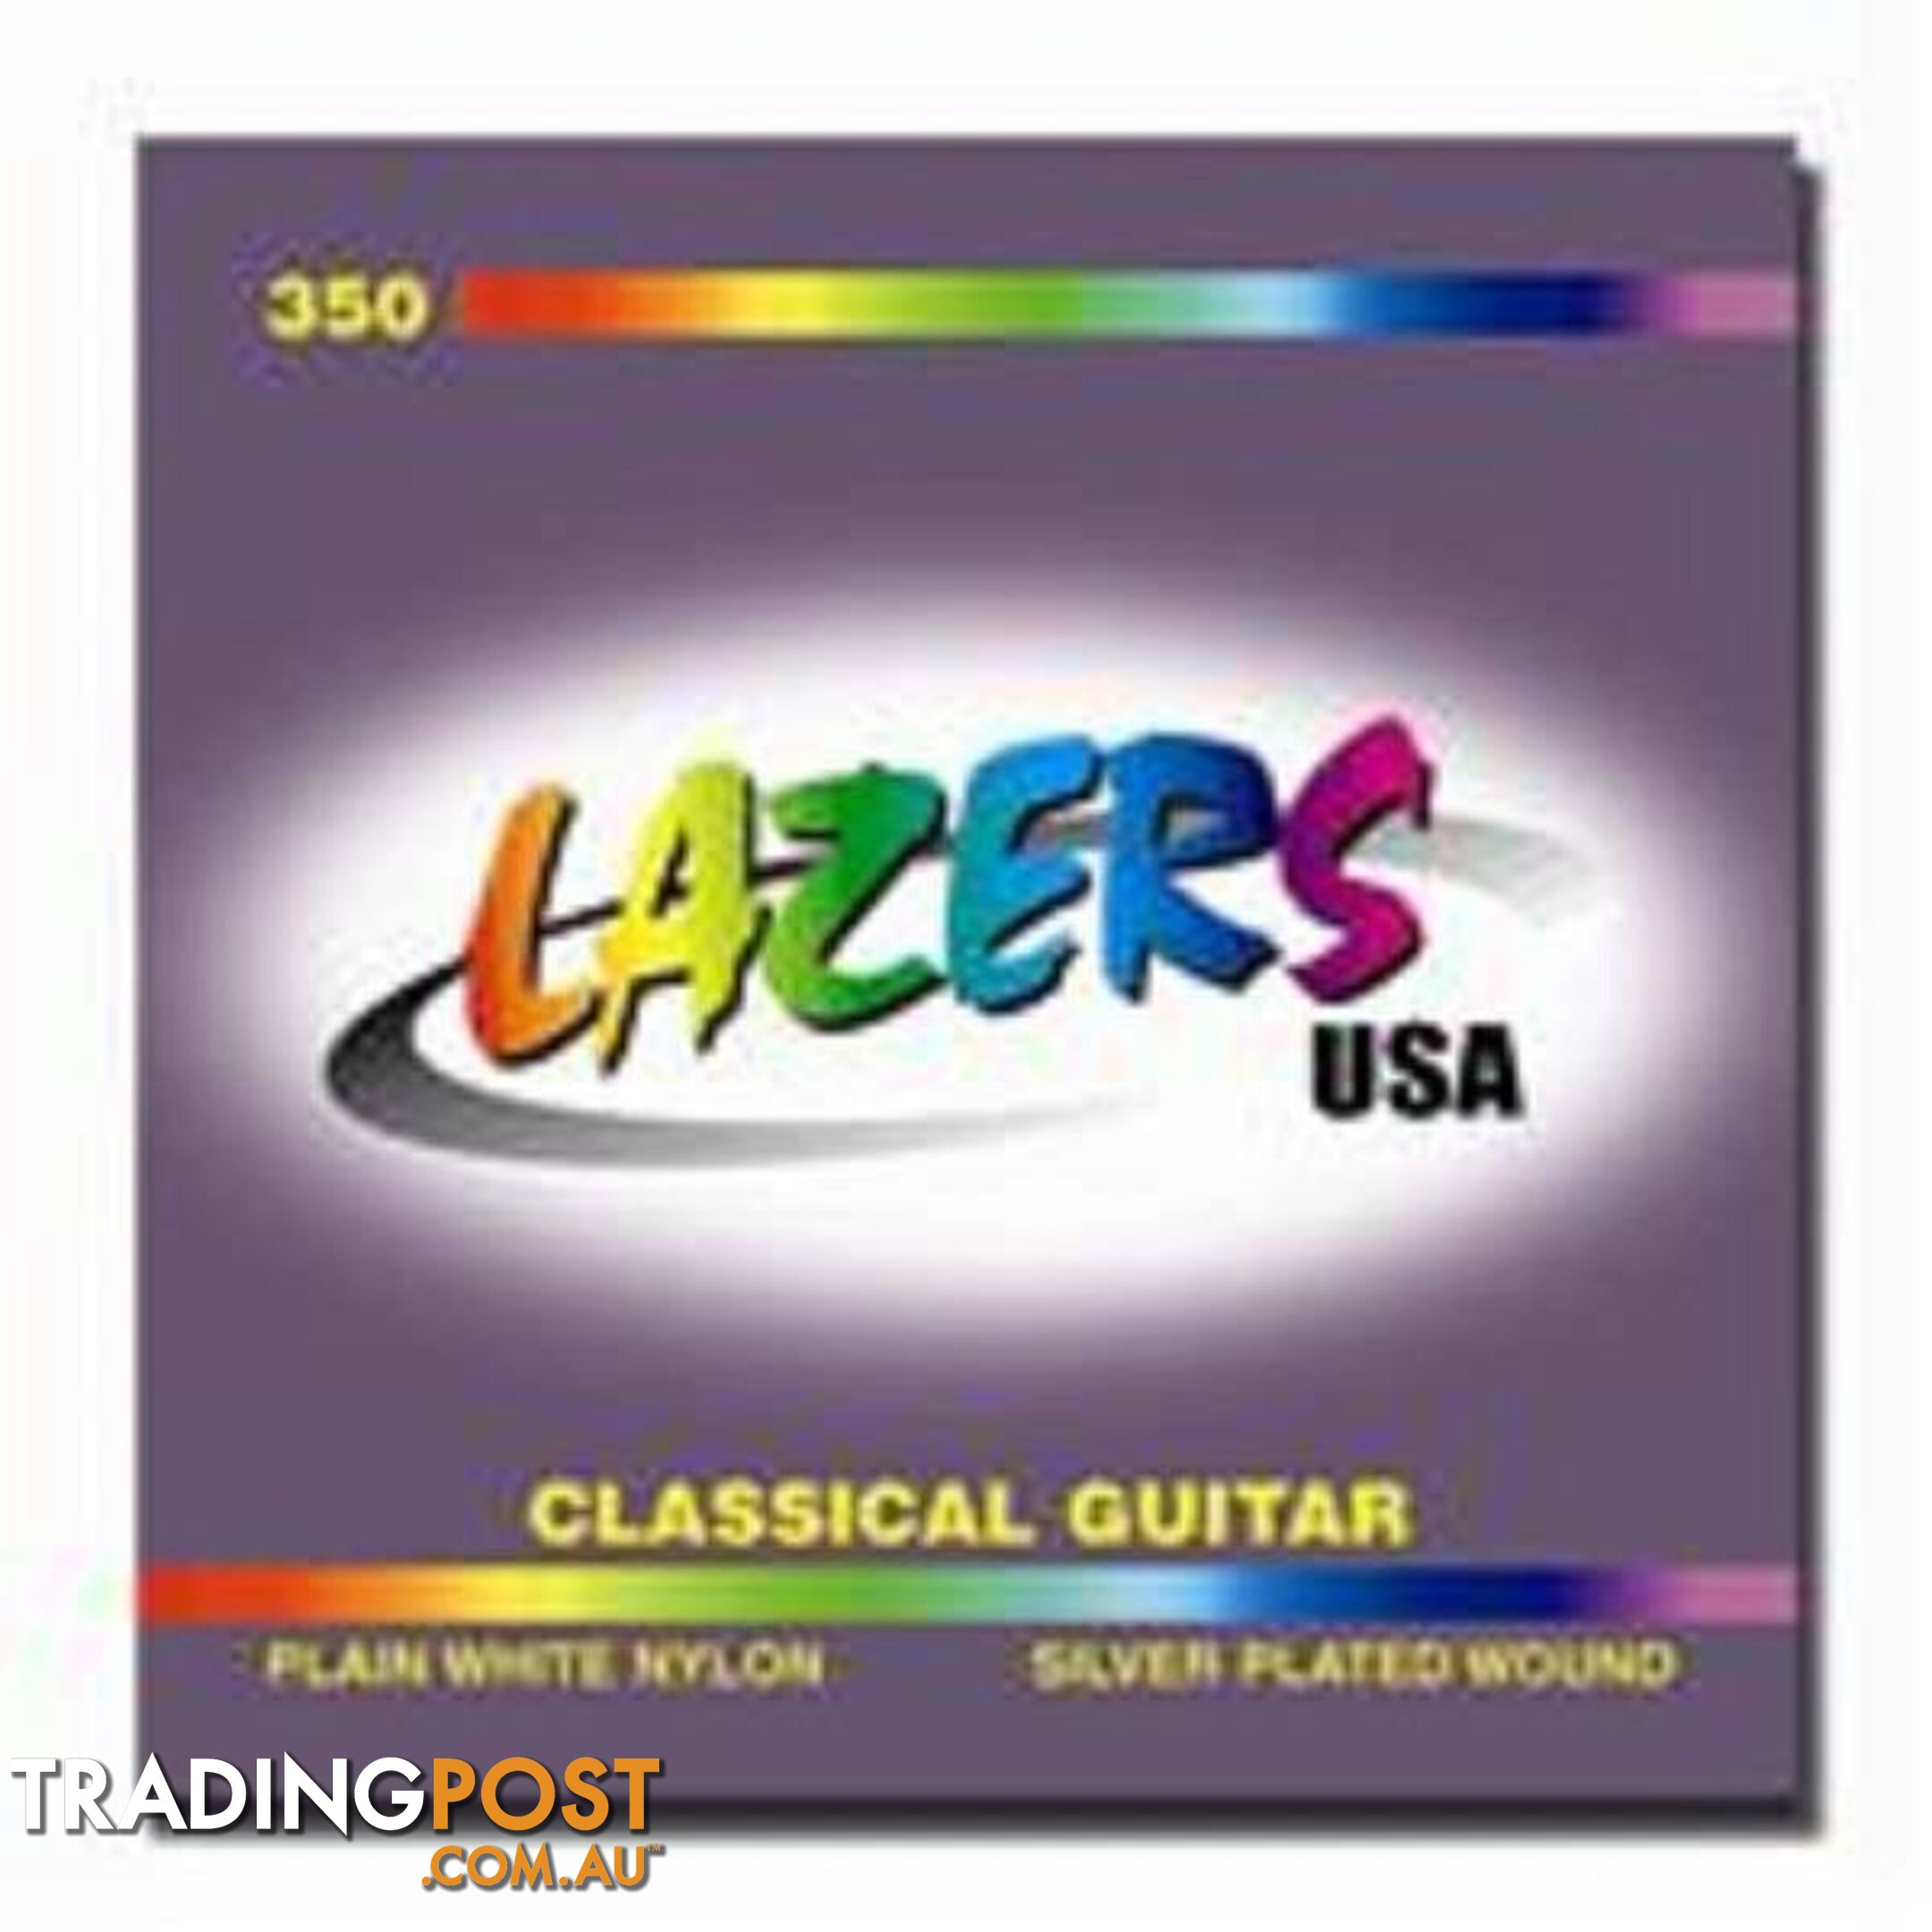 LAZER USA CLASSICAL GUITAR SILVER PLATED WOUND PICKUP OR POSTAGE